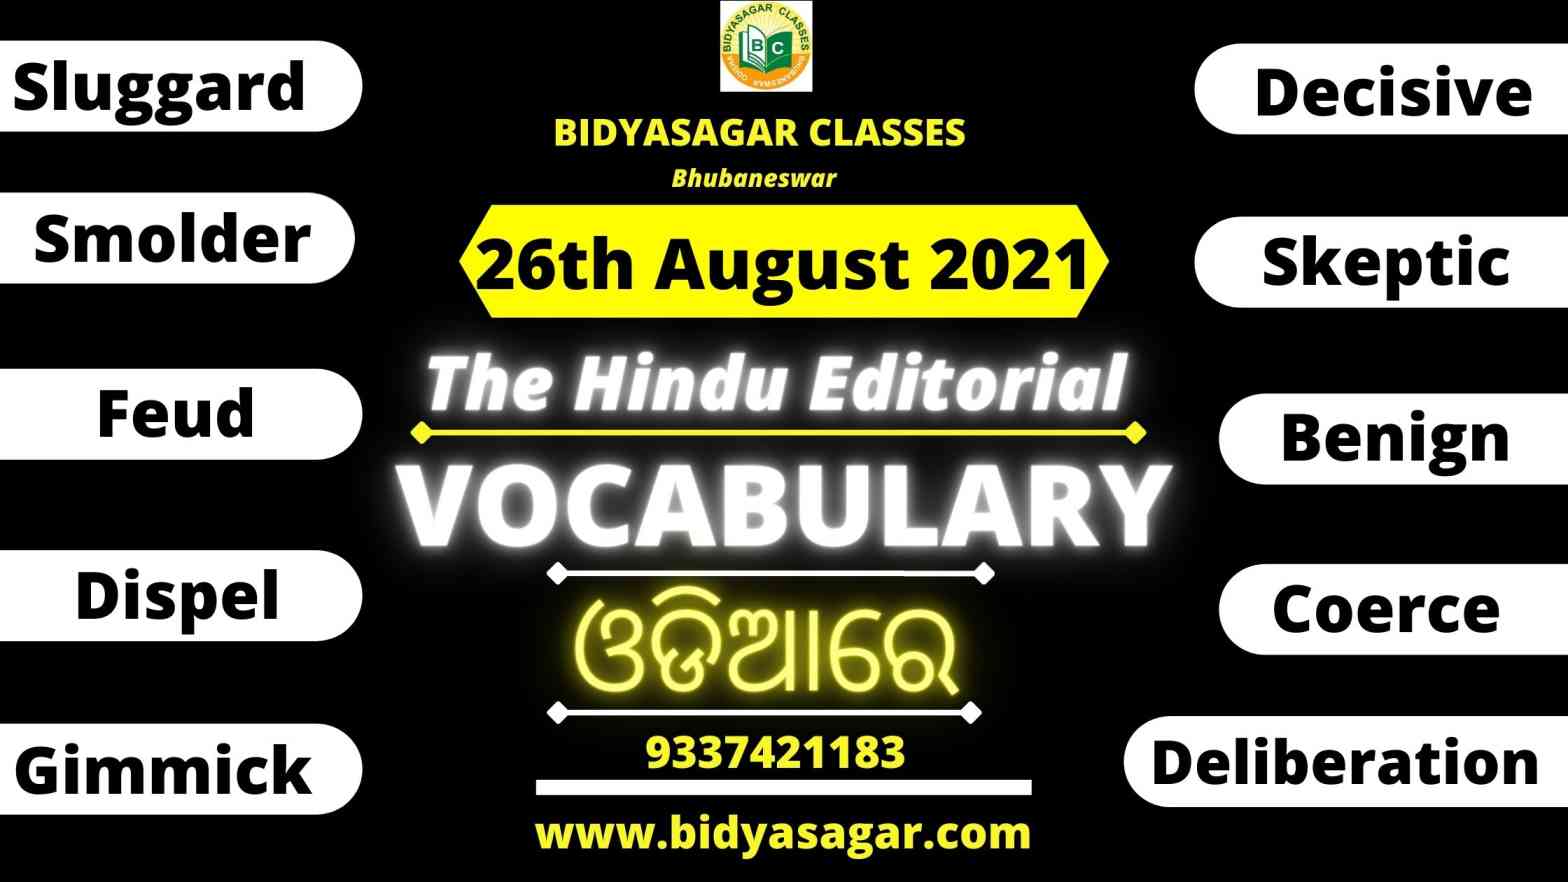 The Hindu Editorial Vocabulary of 26th August 2021